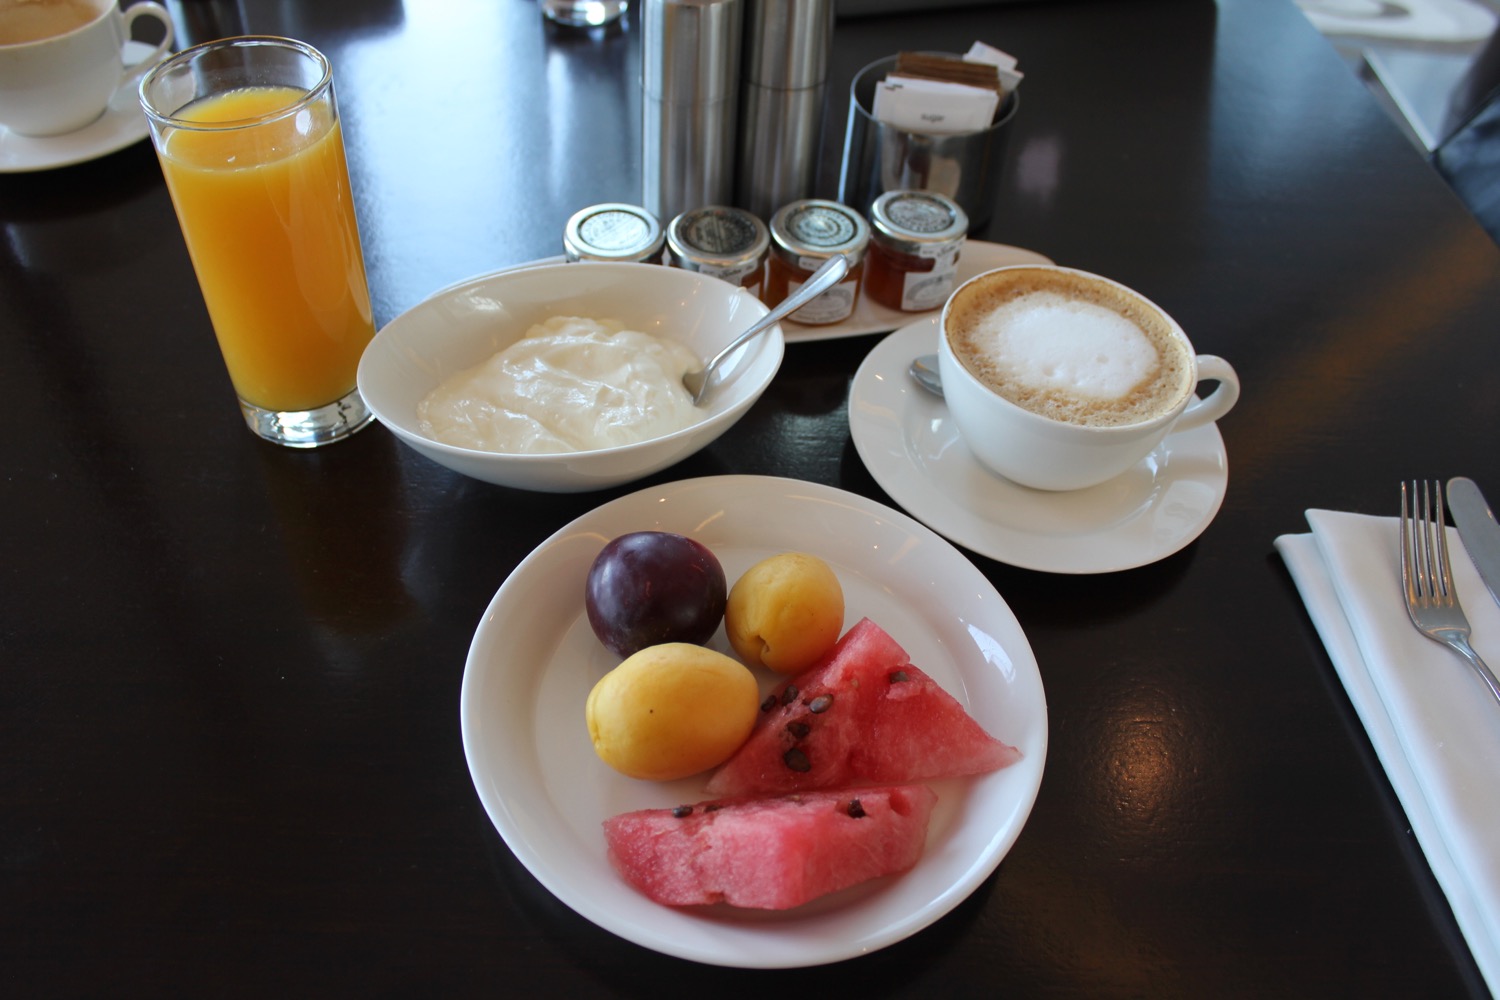 a plate of fruit and a cup of coffee